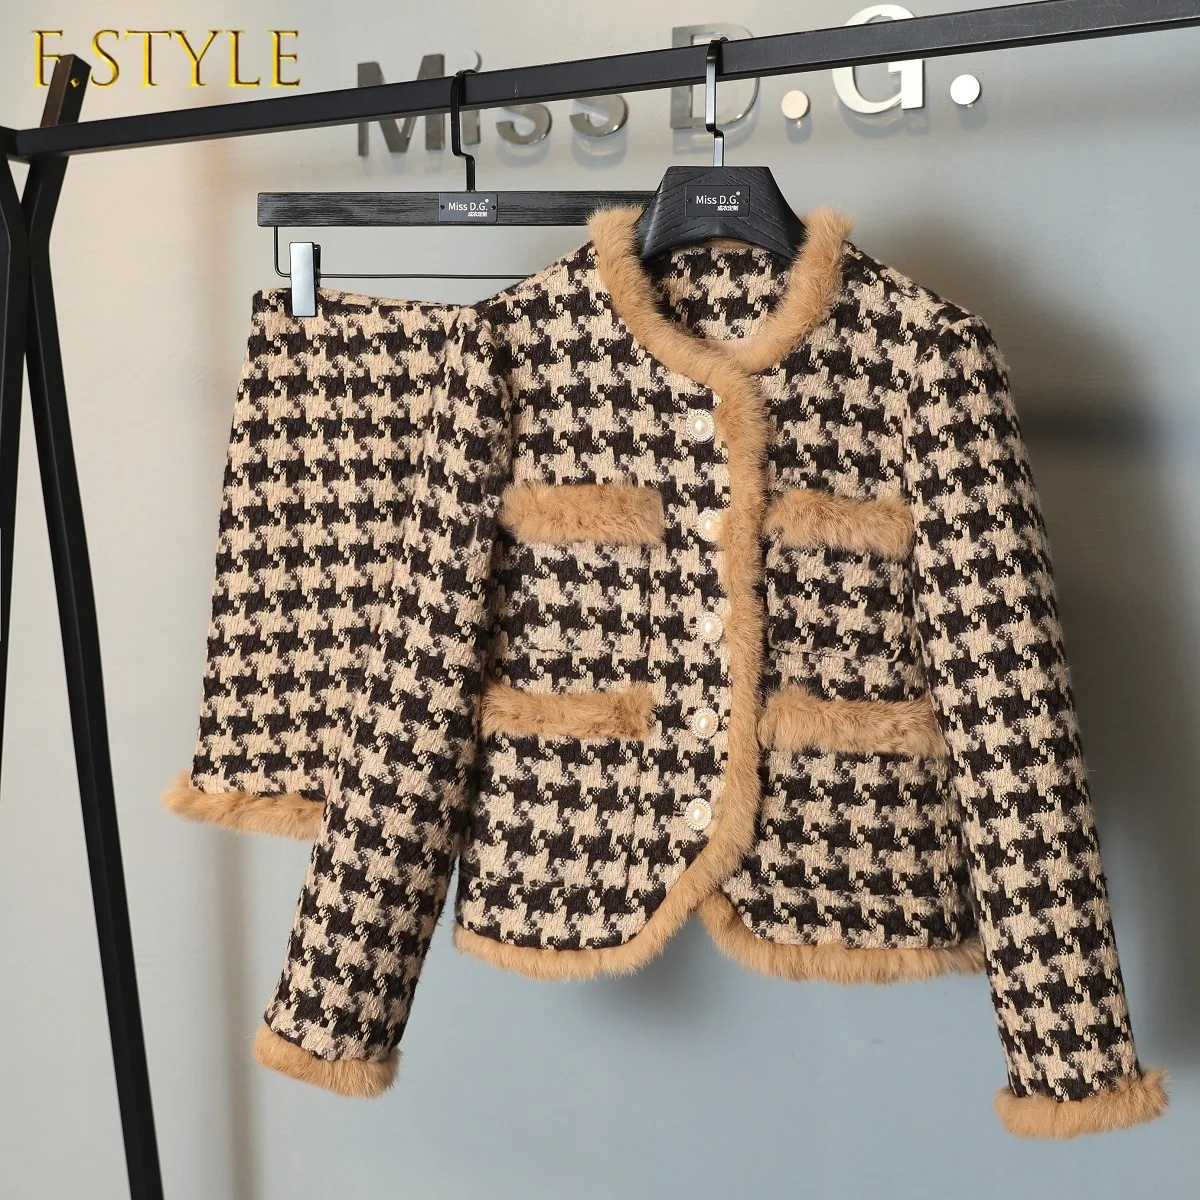 2021 Autumn Winter Women's Fashion Single Breasted Woolen Coats + Skirts Suits Female Houndstooth Pocket Warm Two Piece Sets